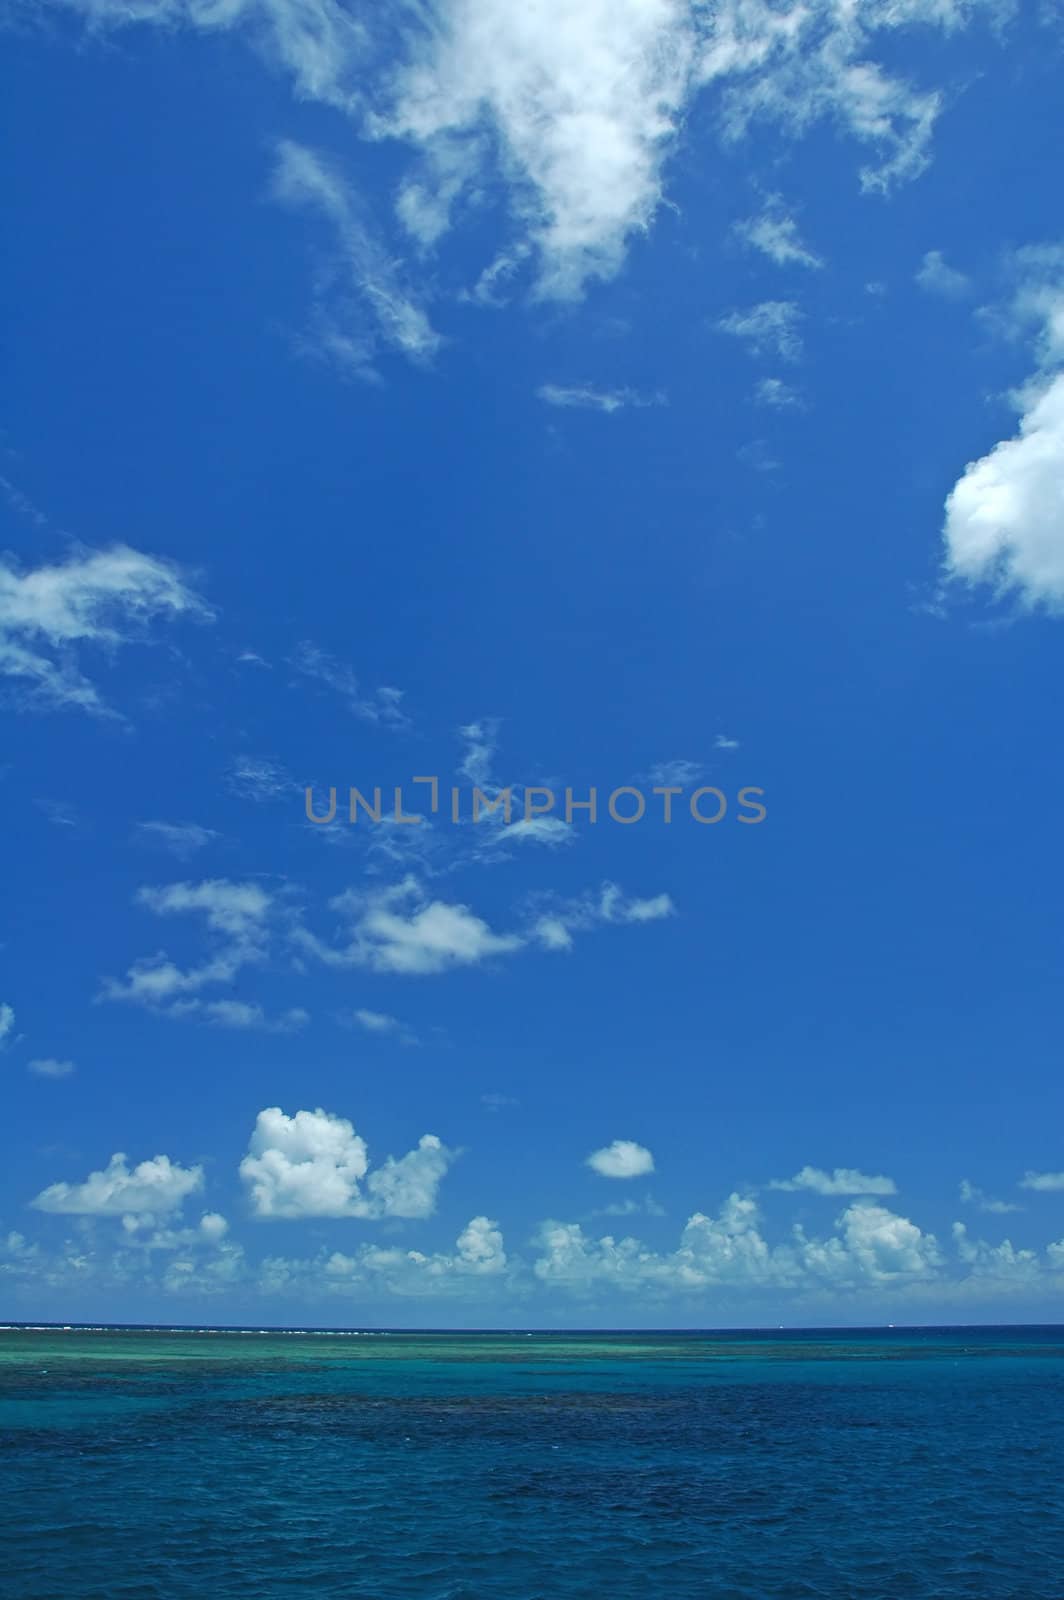 ocean scene, blue sky with white clouds, great barrier reef